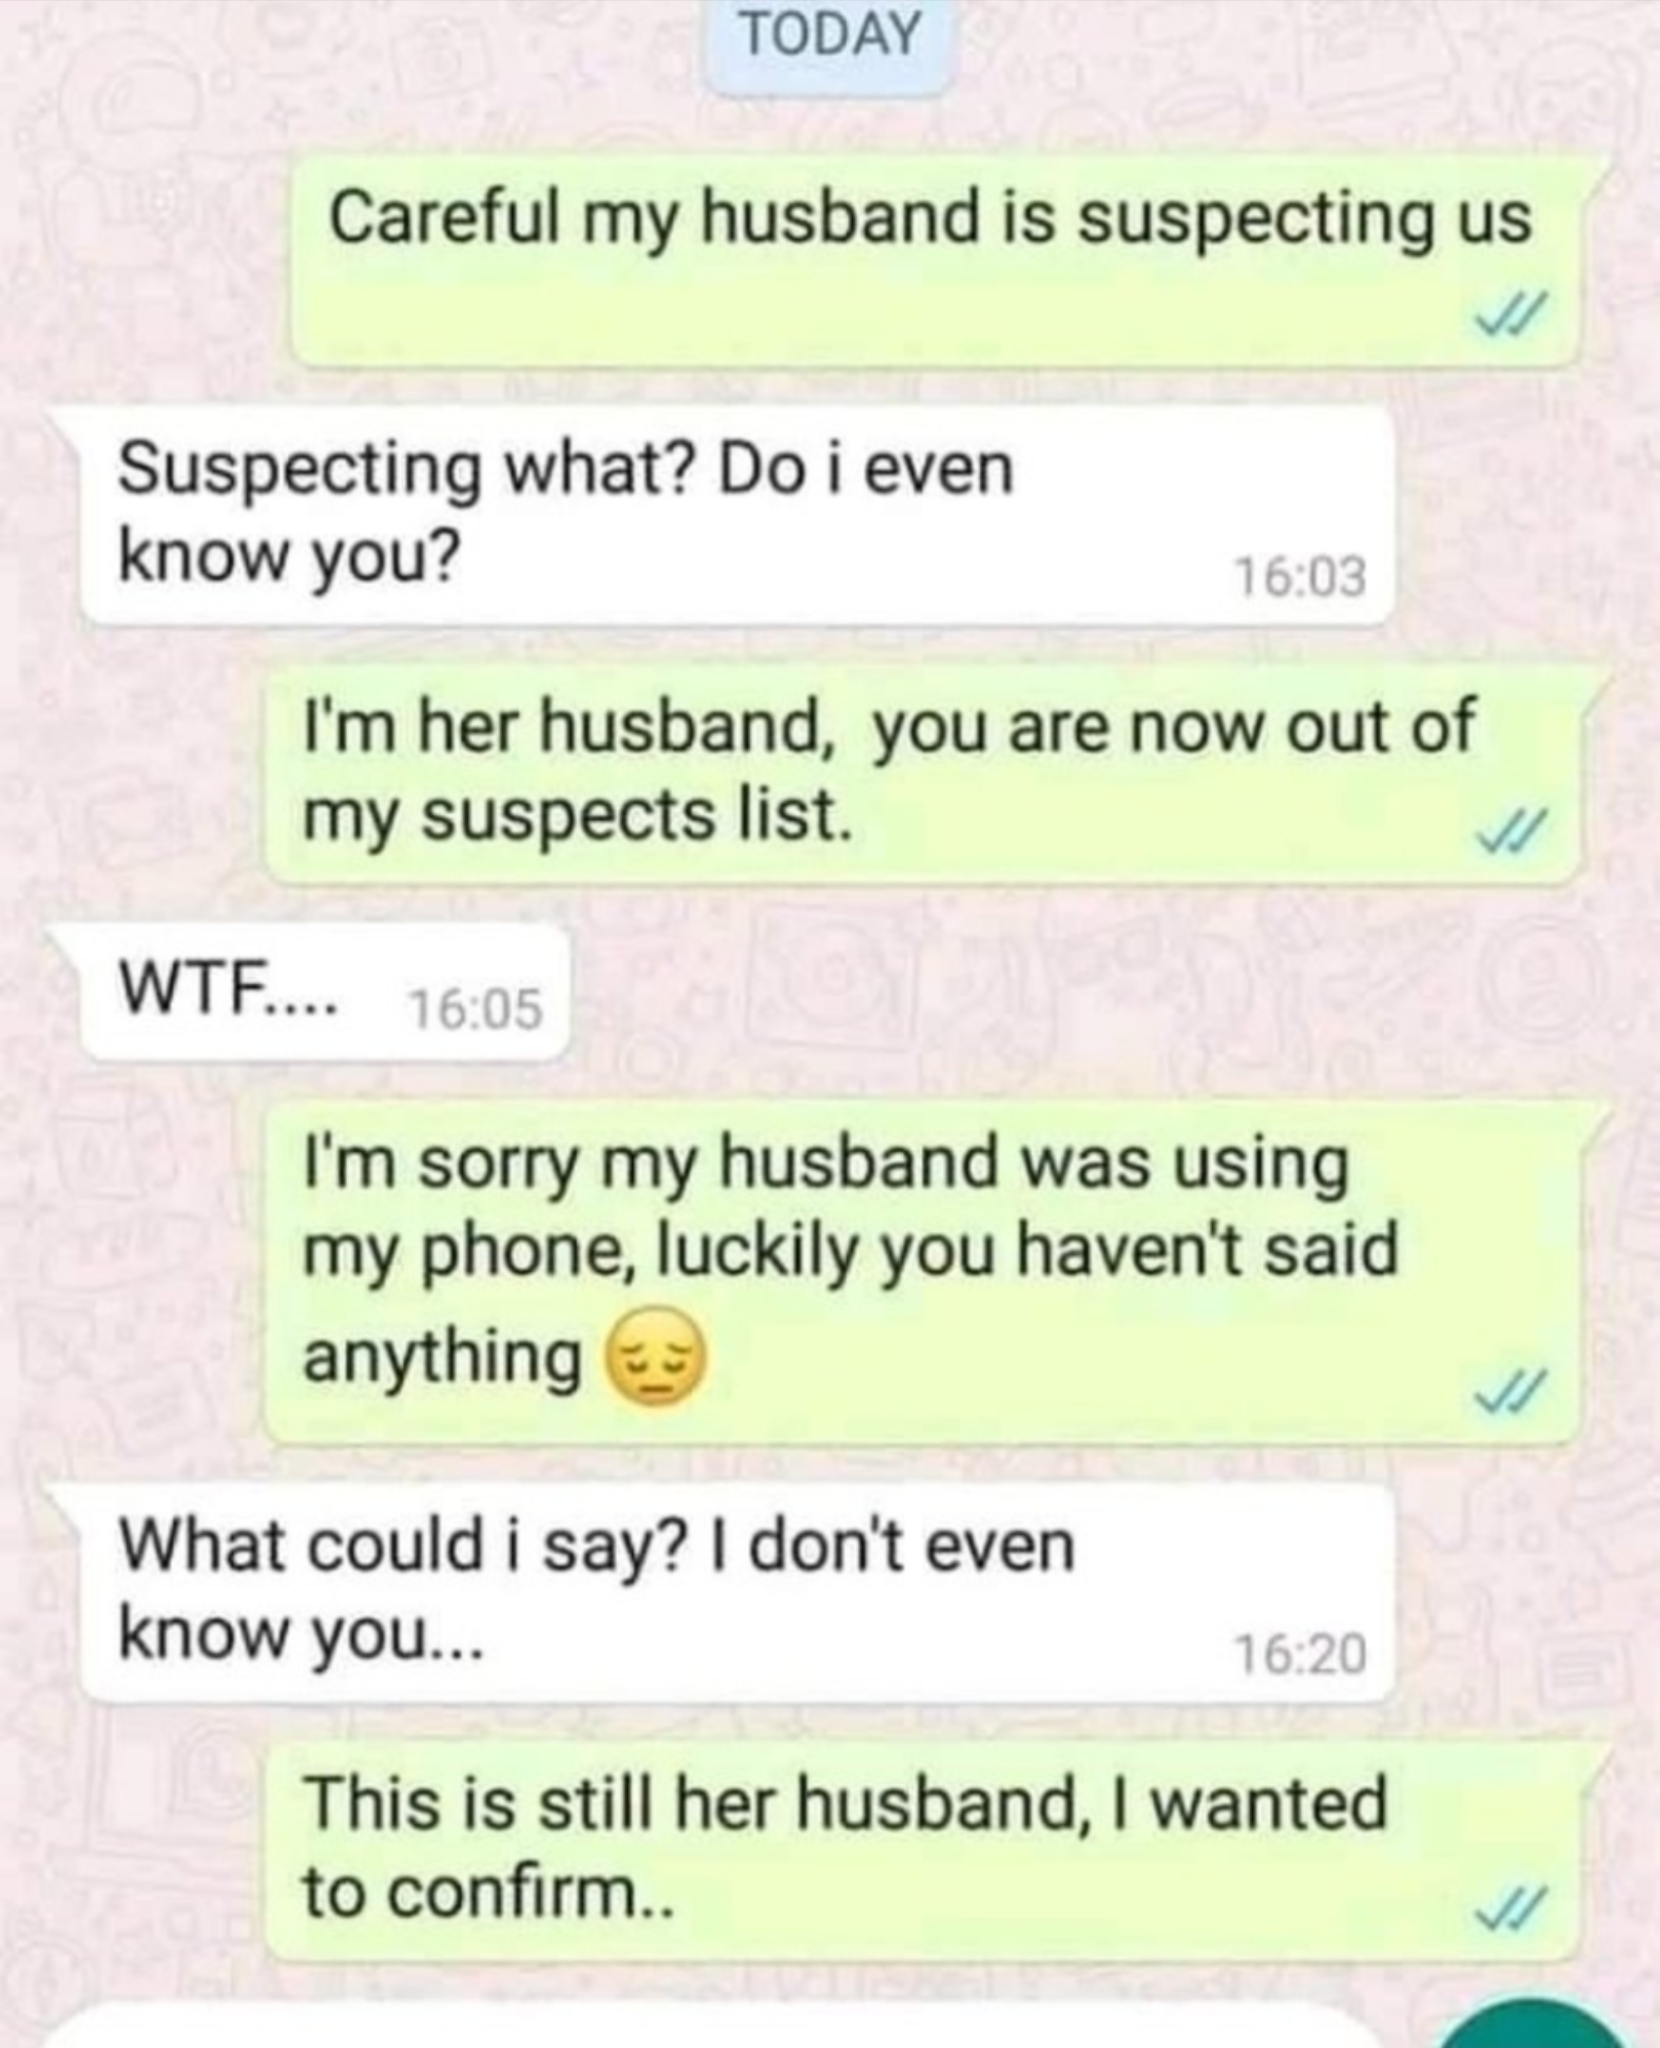 cringe pics - wtf pics - document - Today Careful my husband is suspecting us Suspecting what? Do i even know you? I'm her husband, you are now out of my suspects list. Wtf... I'm sorry my husband was using my phone, luckily you haven't said anything What